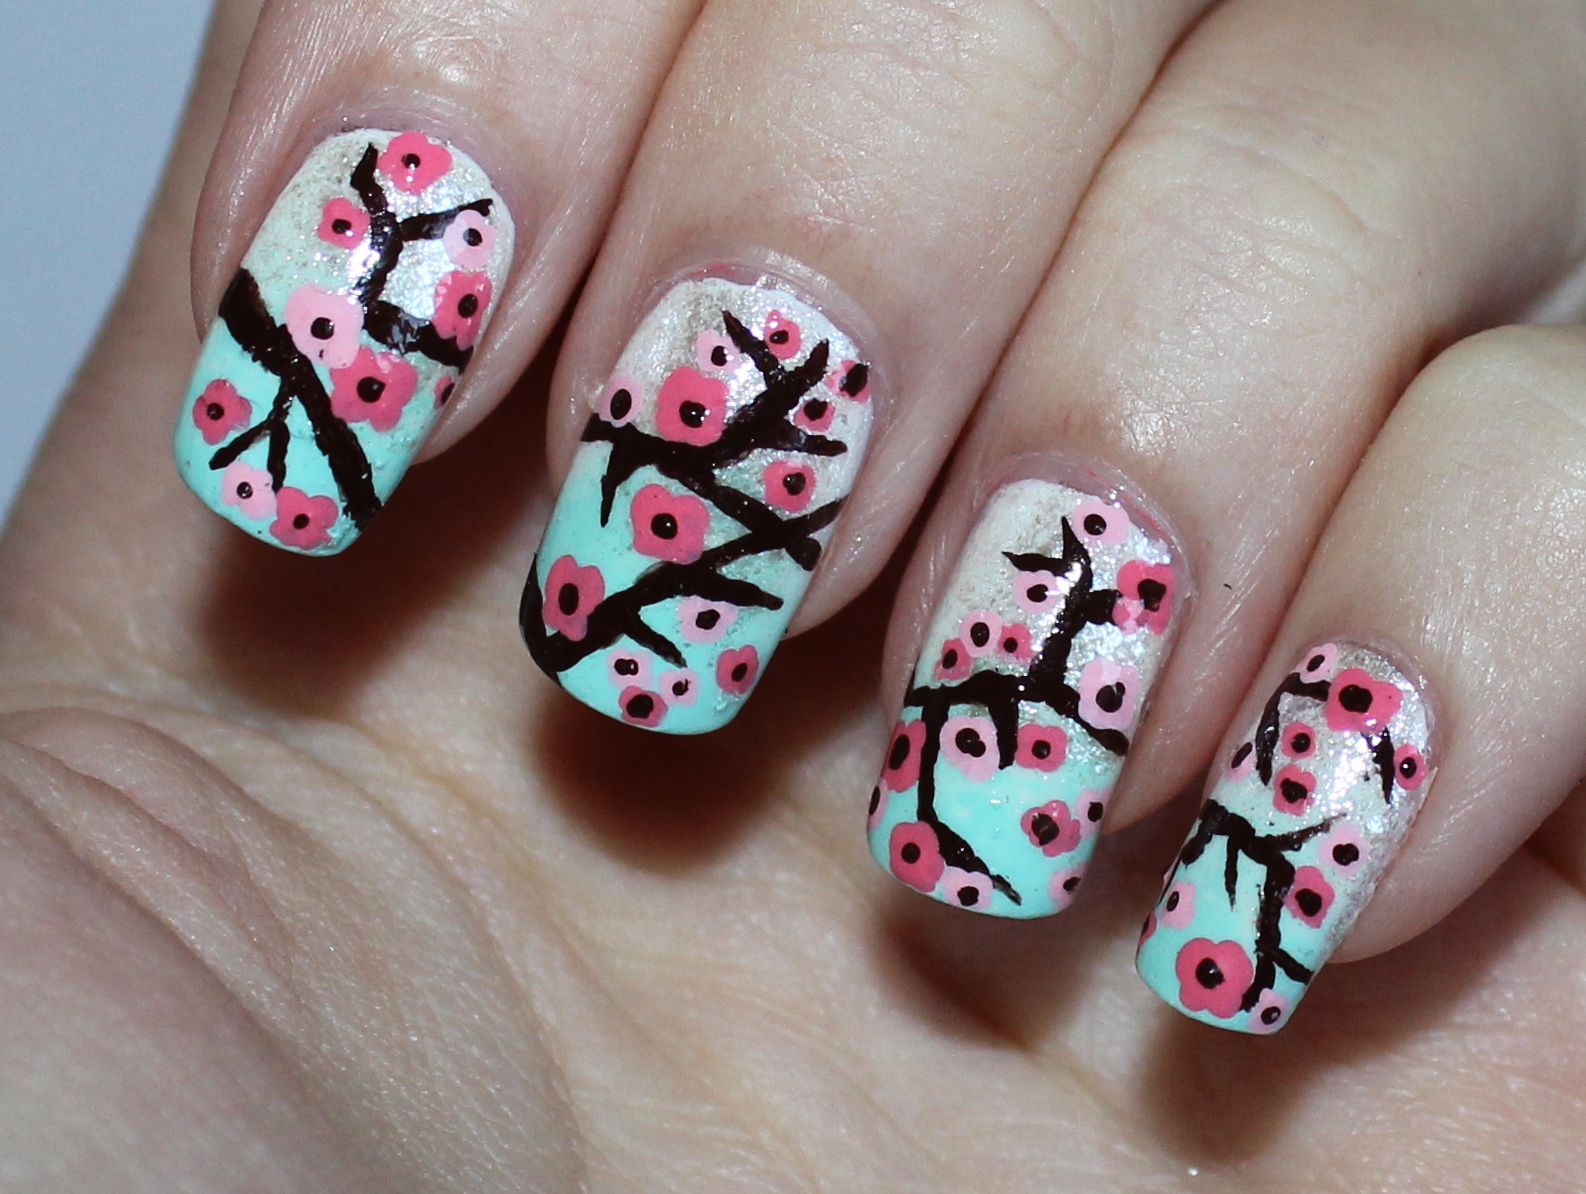 Cherry Blossom Nail Design in Arbroath - wide 2